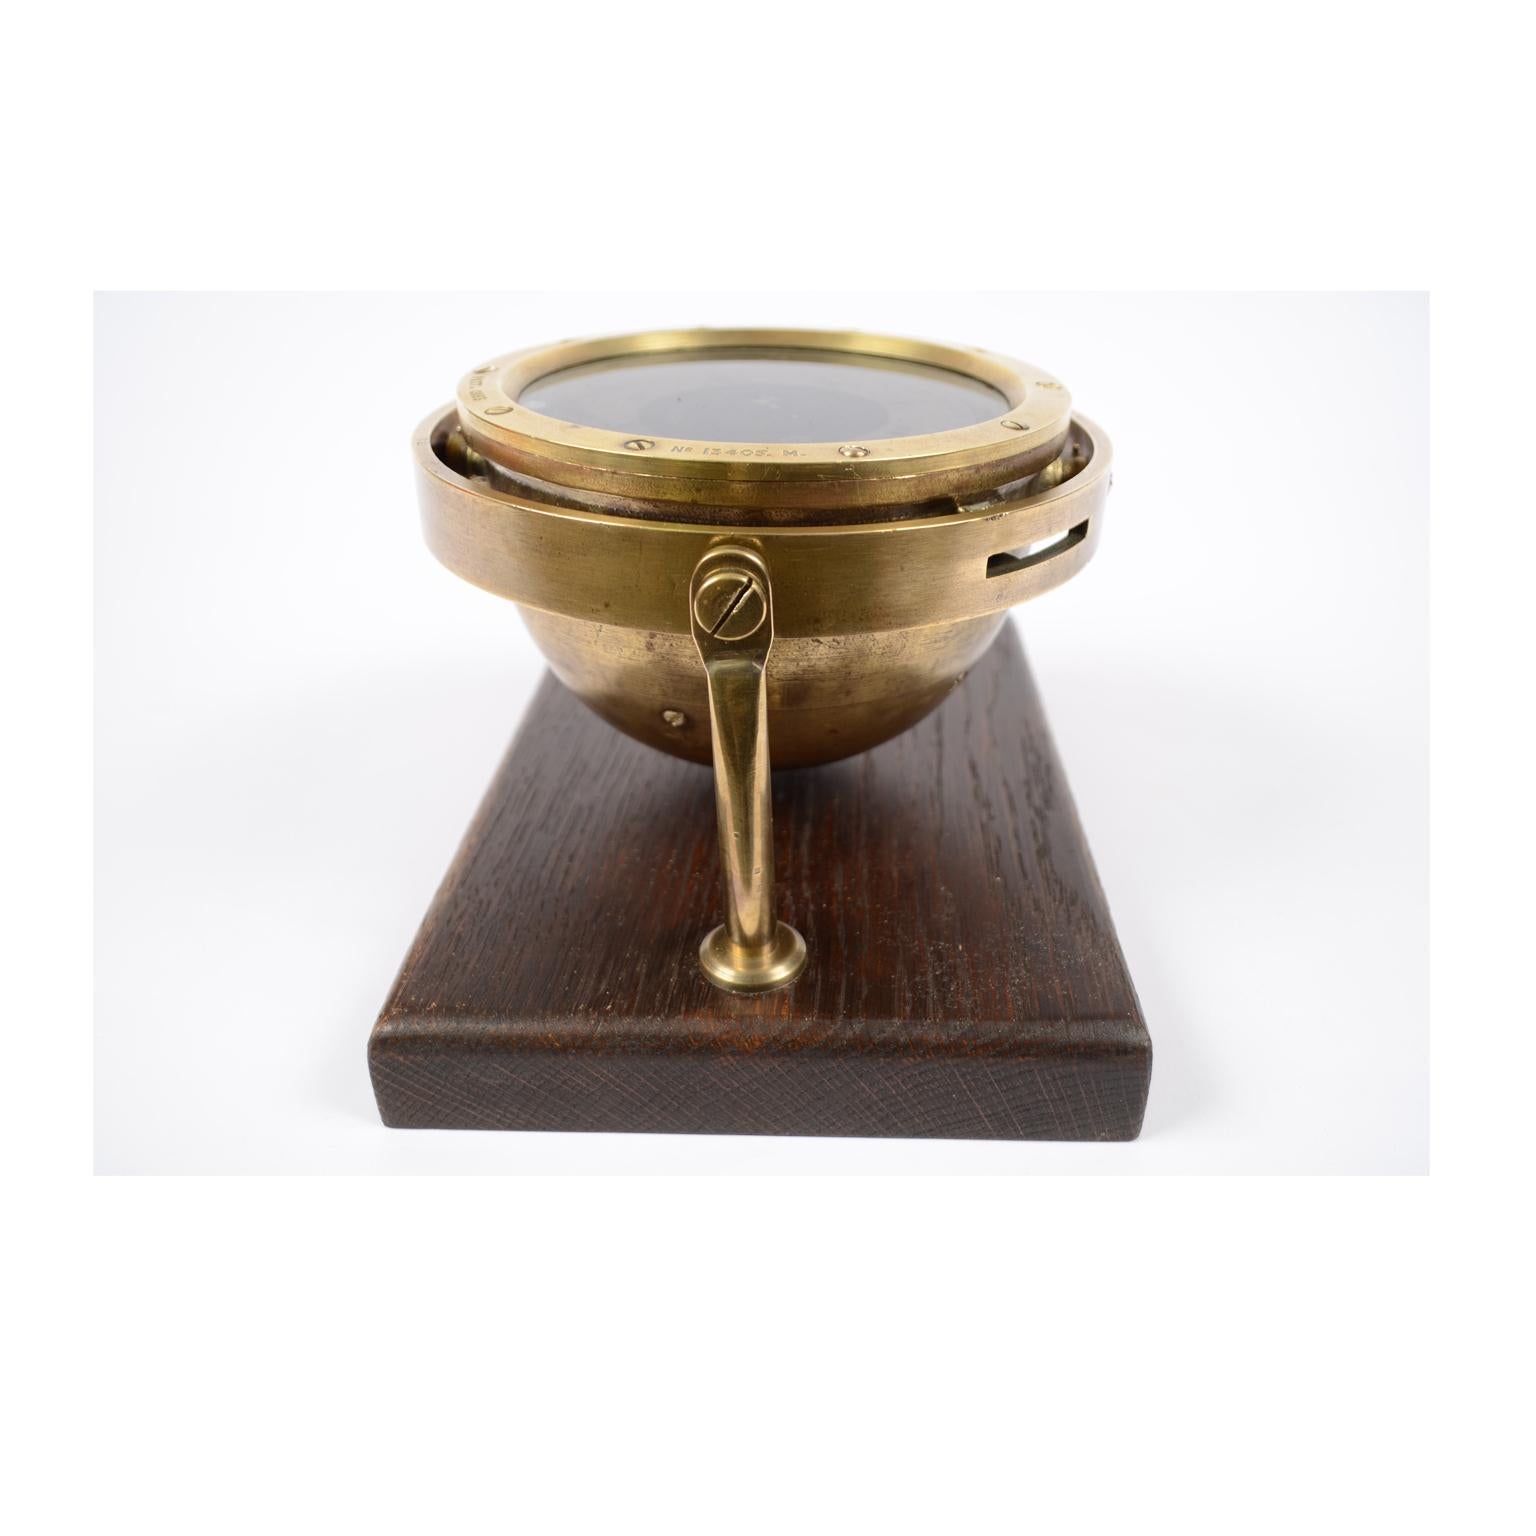 Mid-20th Century British Compass of the 1940s Brass and Bronze on a Wooden Base